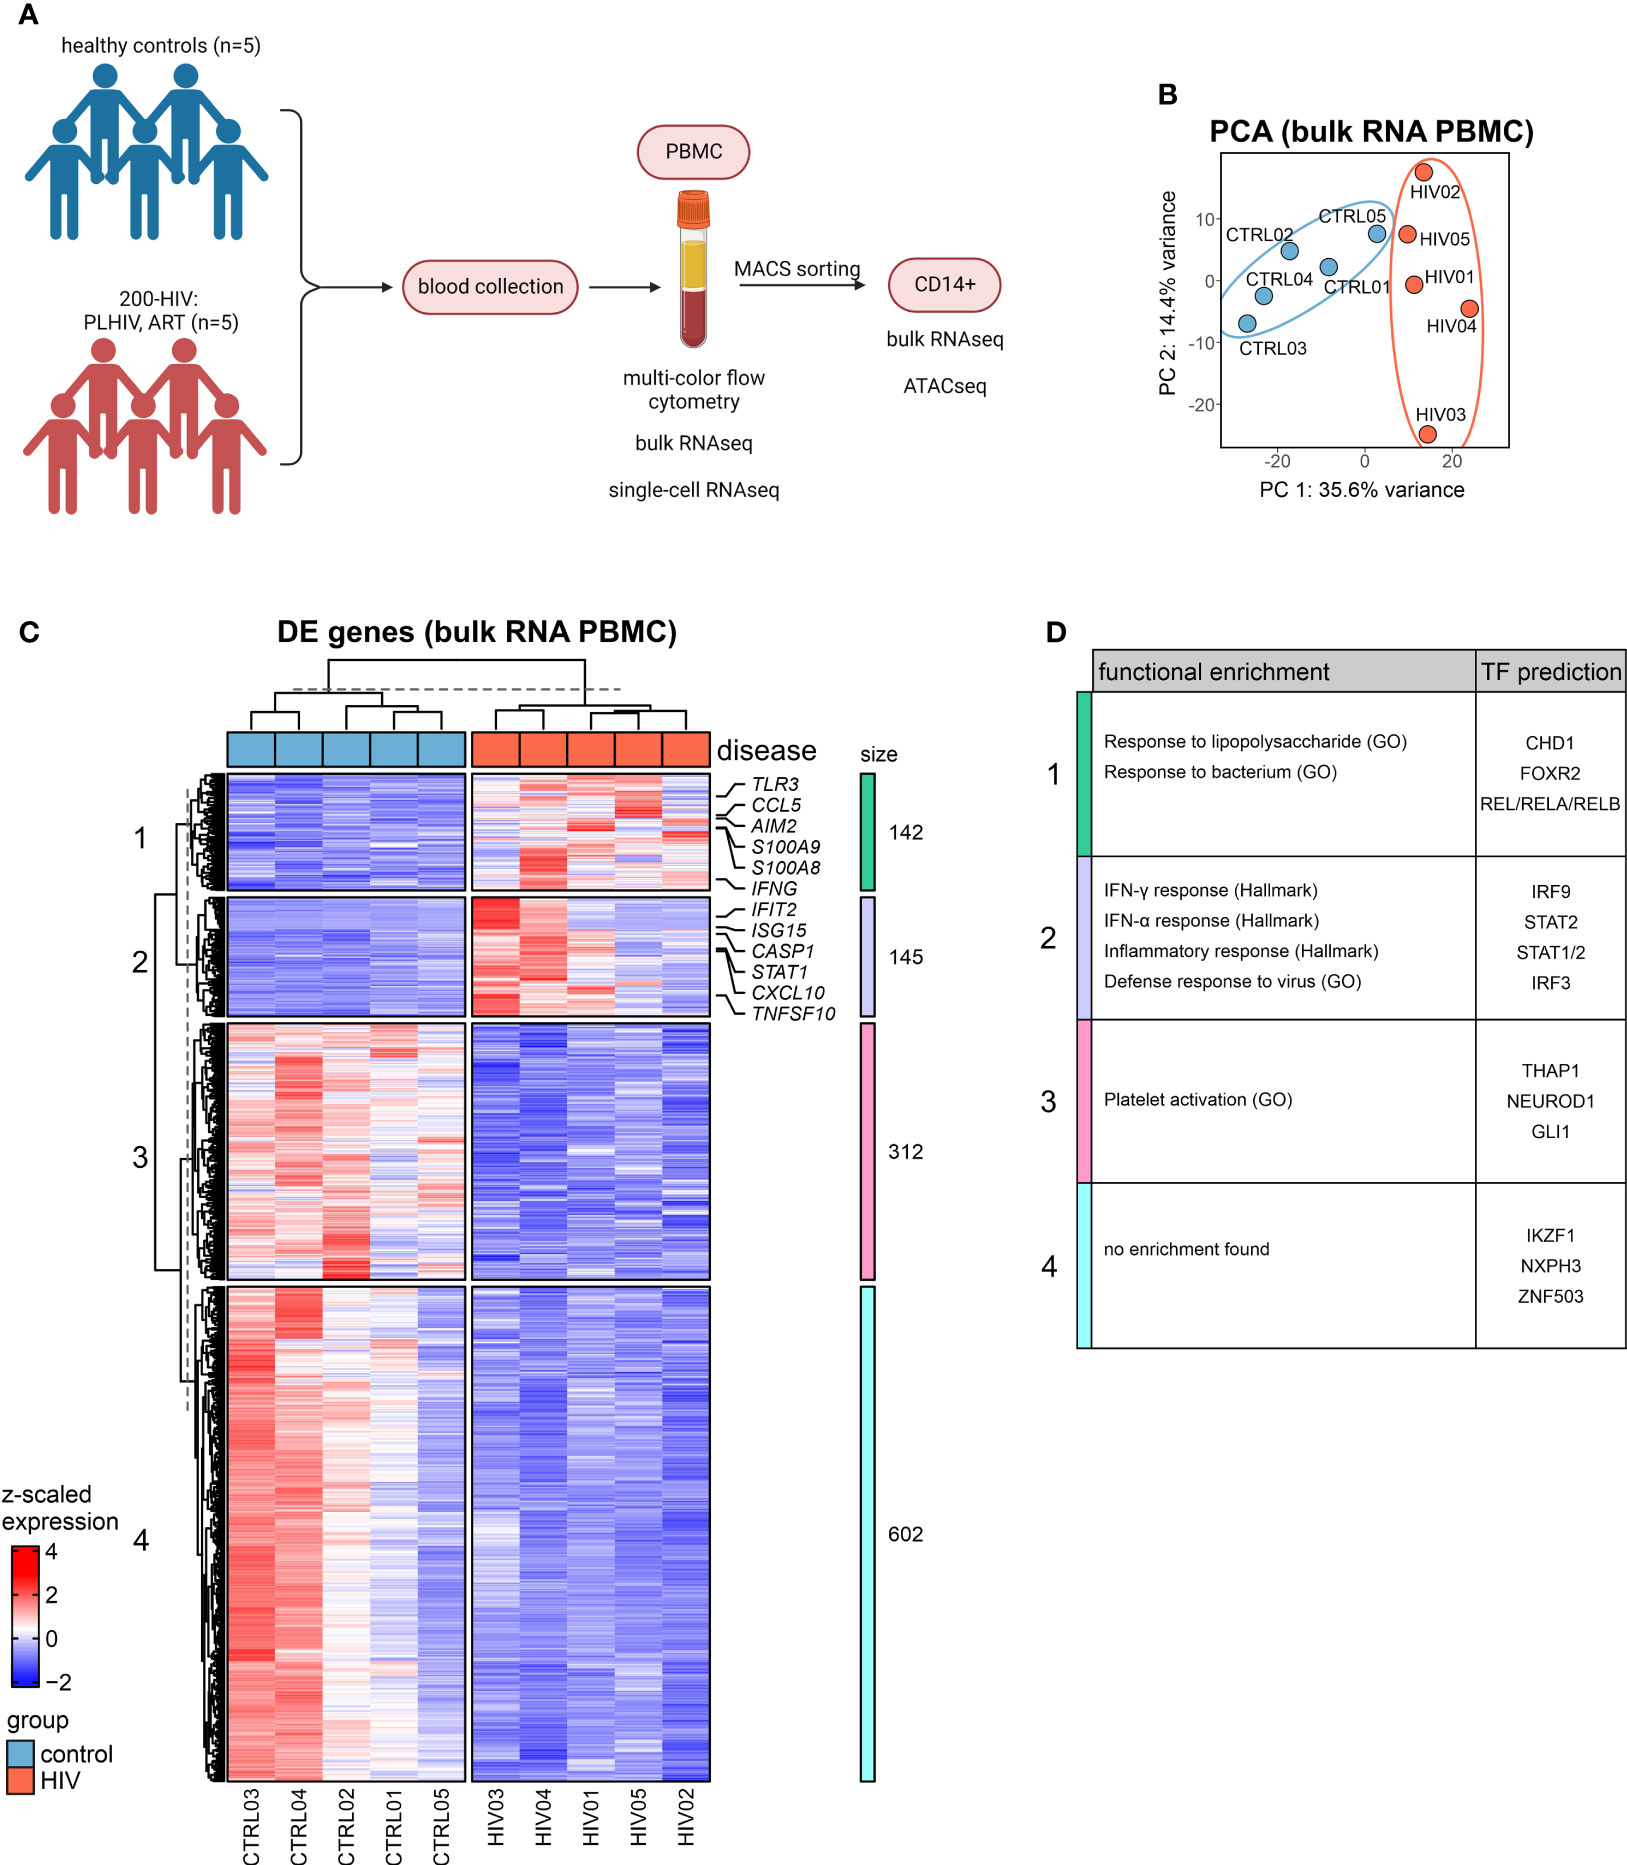 Identification of drug candidates targeting monocyte reprogramming in people living with HIV